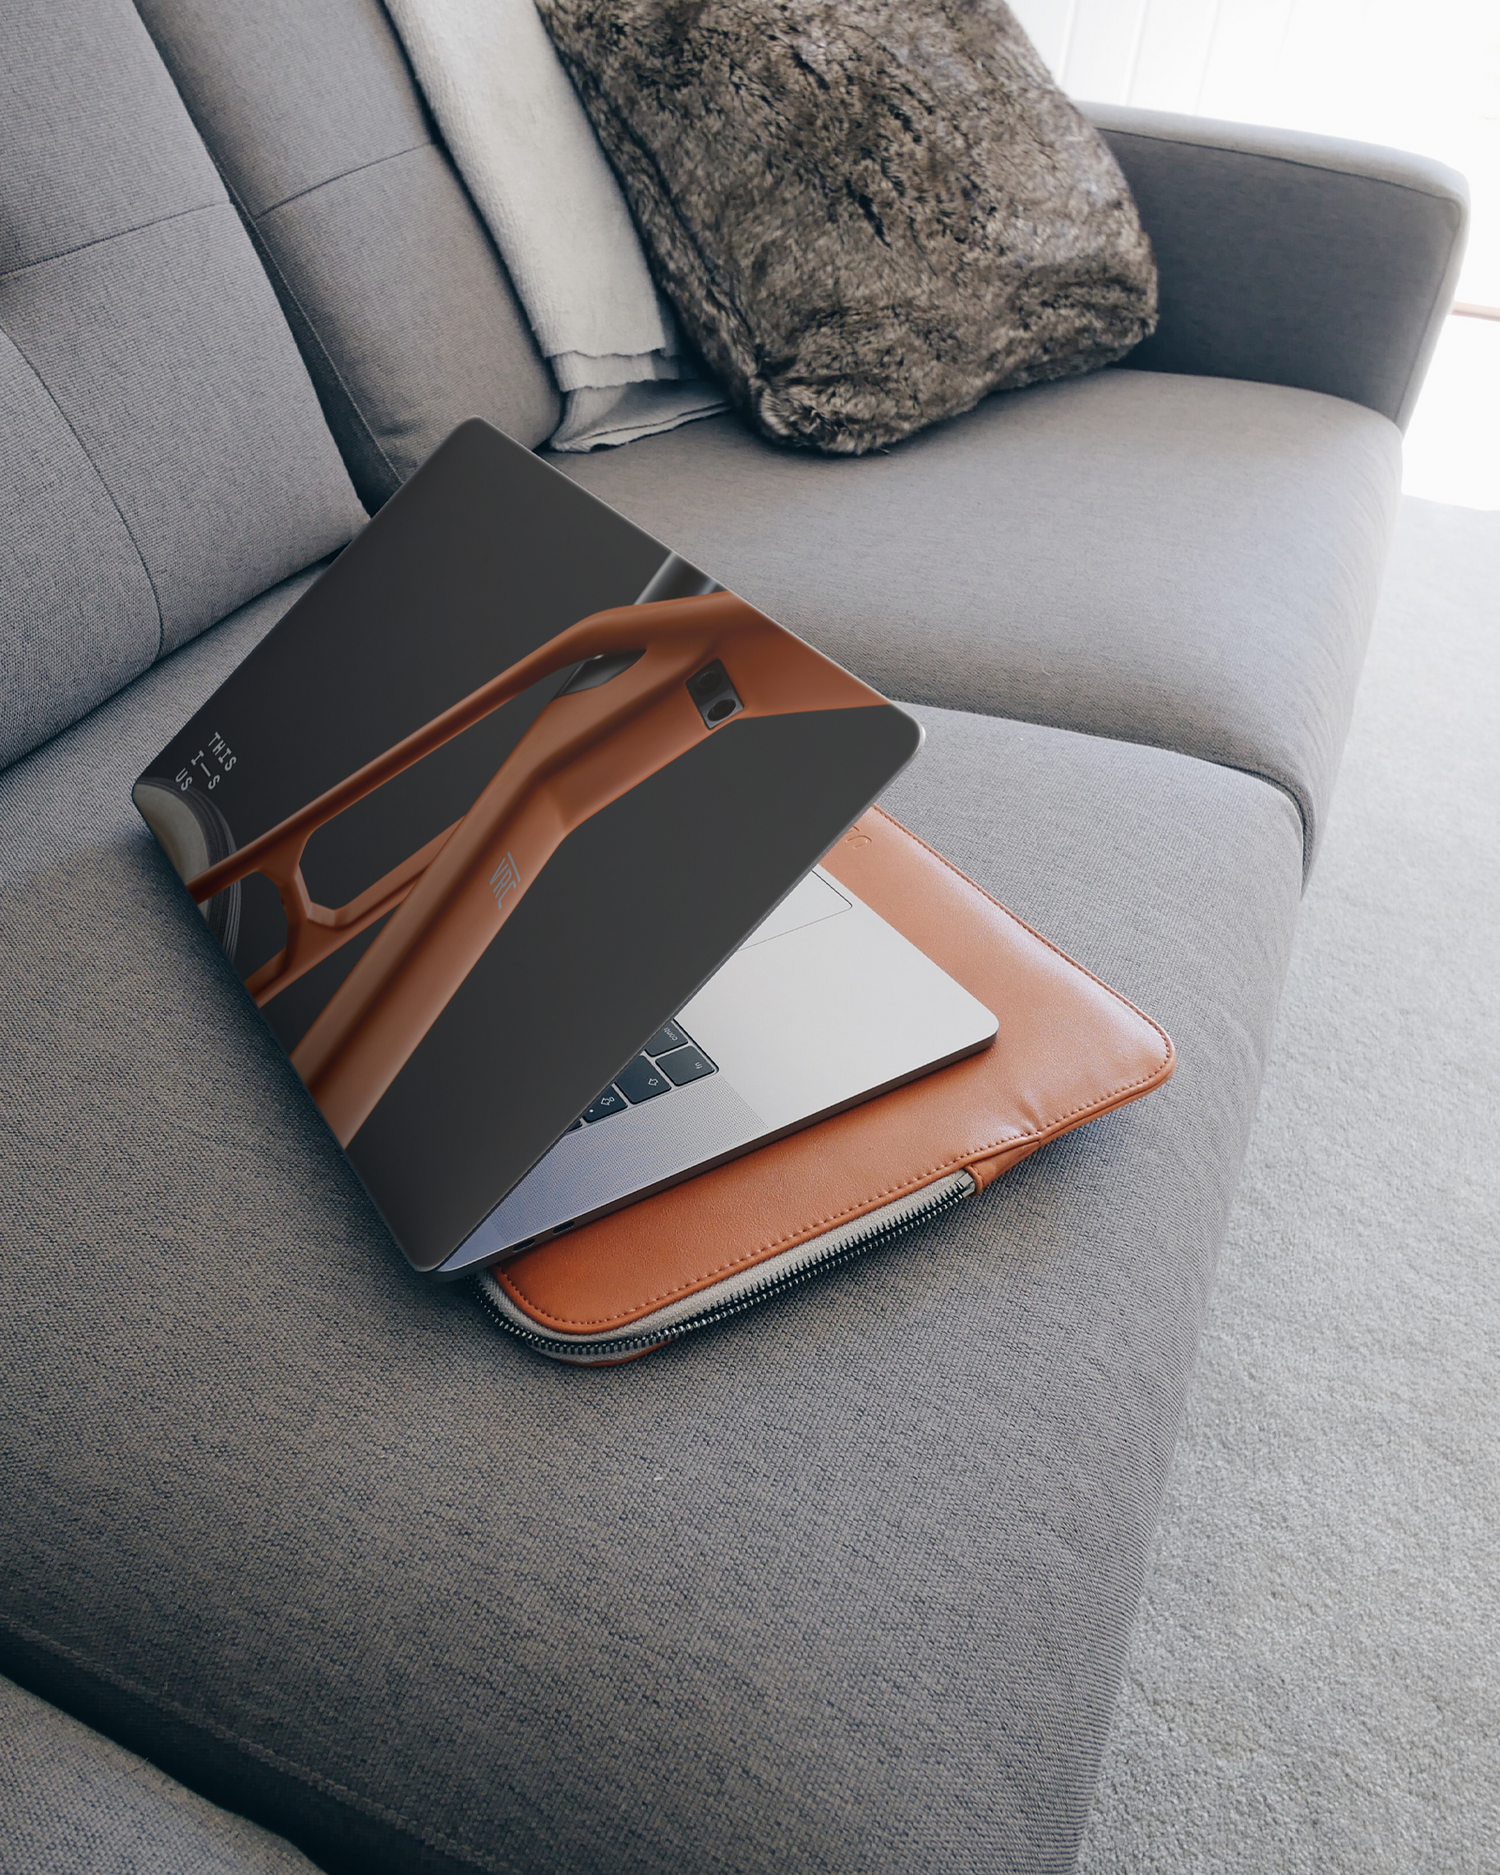 VRC Laptop Skin for 15 inch Apple MacBooks on a couch